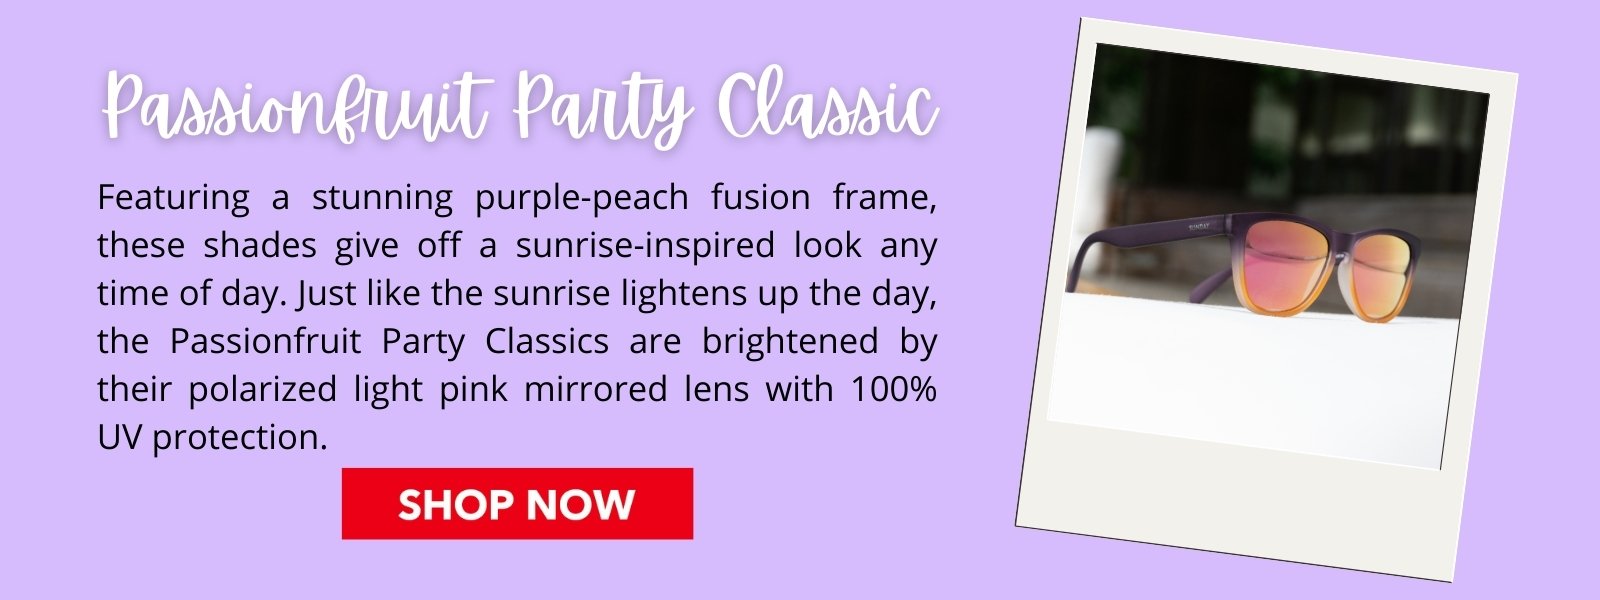 Featuring a stunning purple-peach fusion frame, these shades give off a sunrise-inspired look any time of day. Just like the sunrise lightens up the day, the Passionfruit Party Classics are brightened by their polarized light pink mirrored lens with 100% UV protection. 